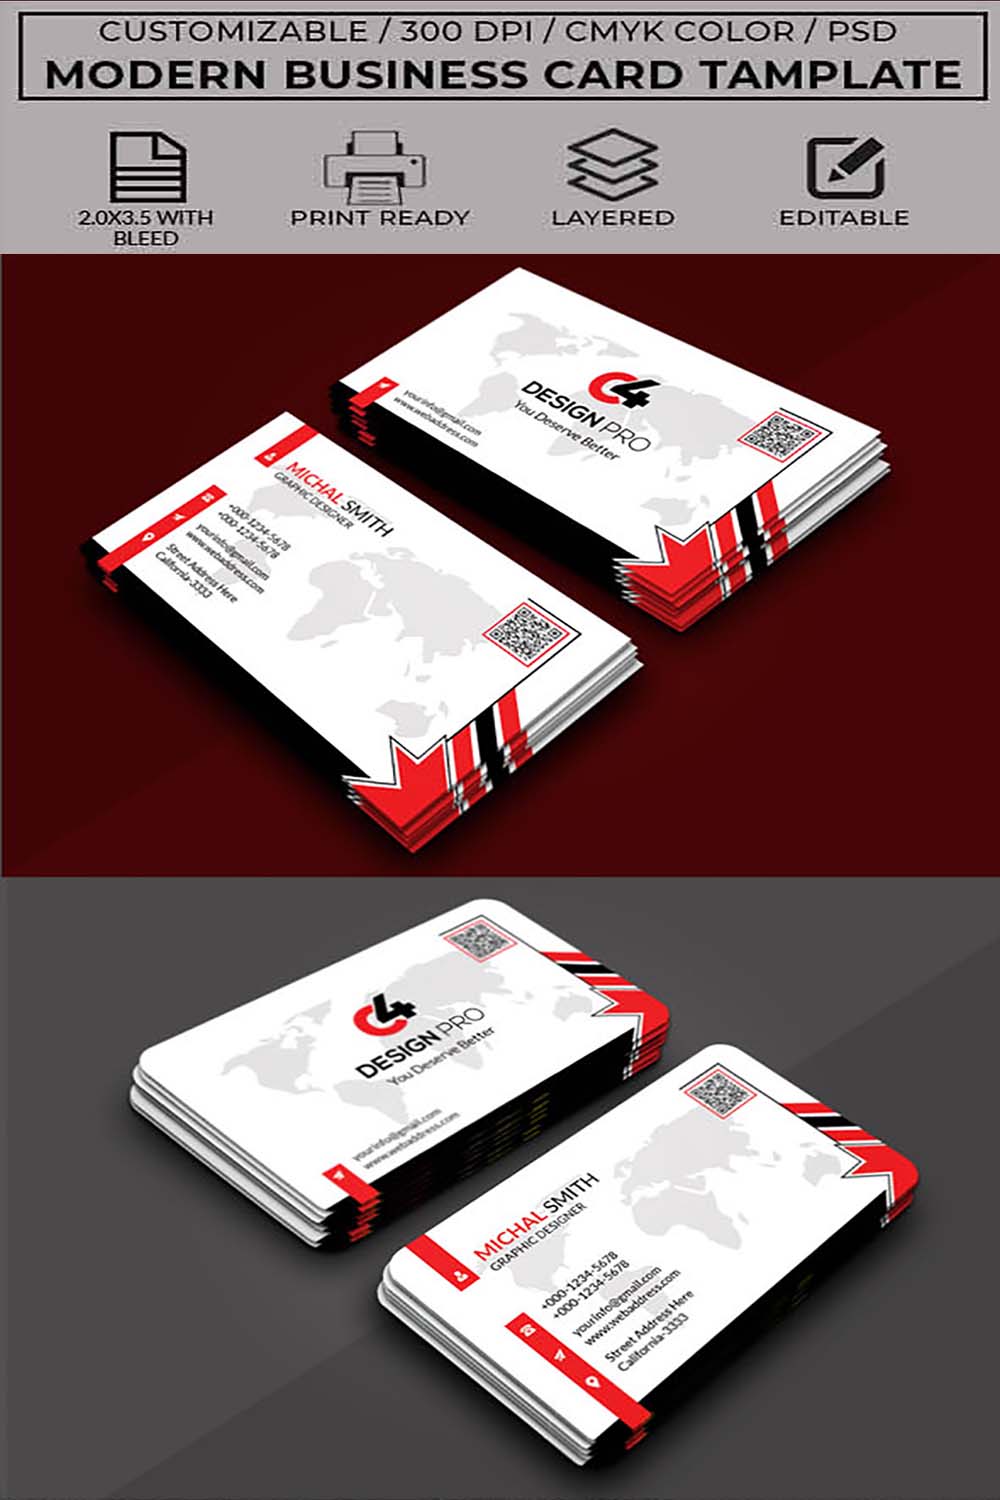 Pinterest image of business cards from a package.